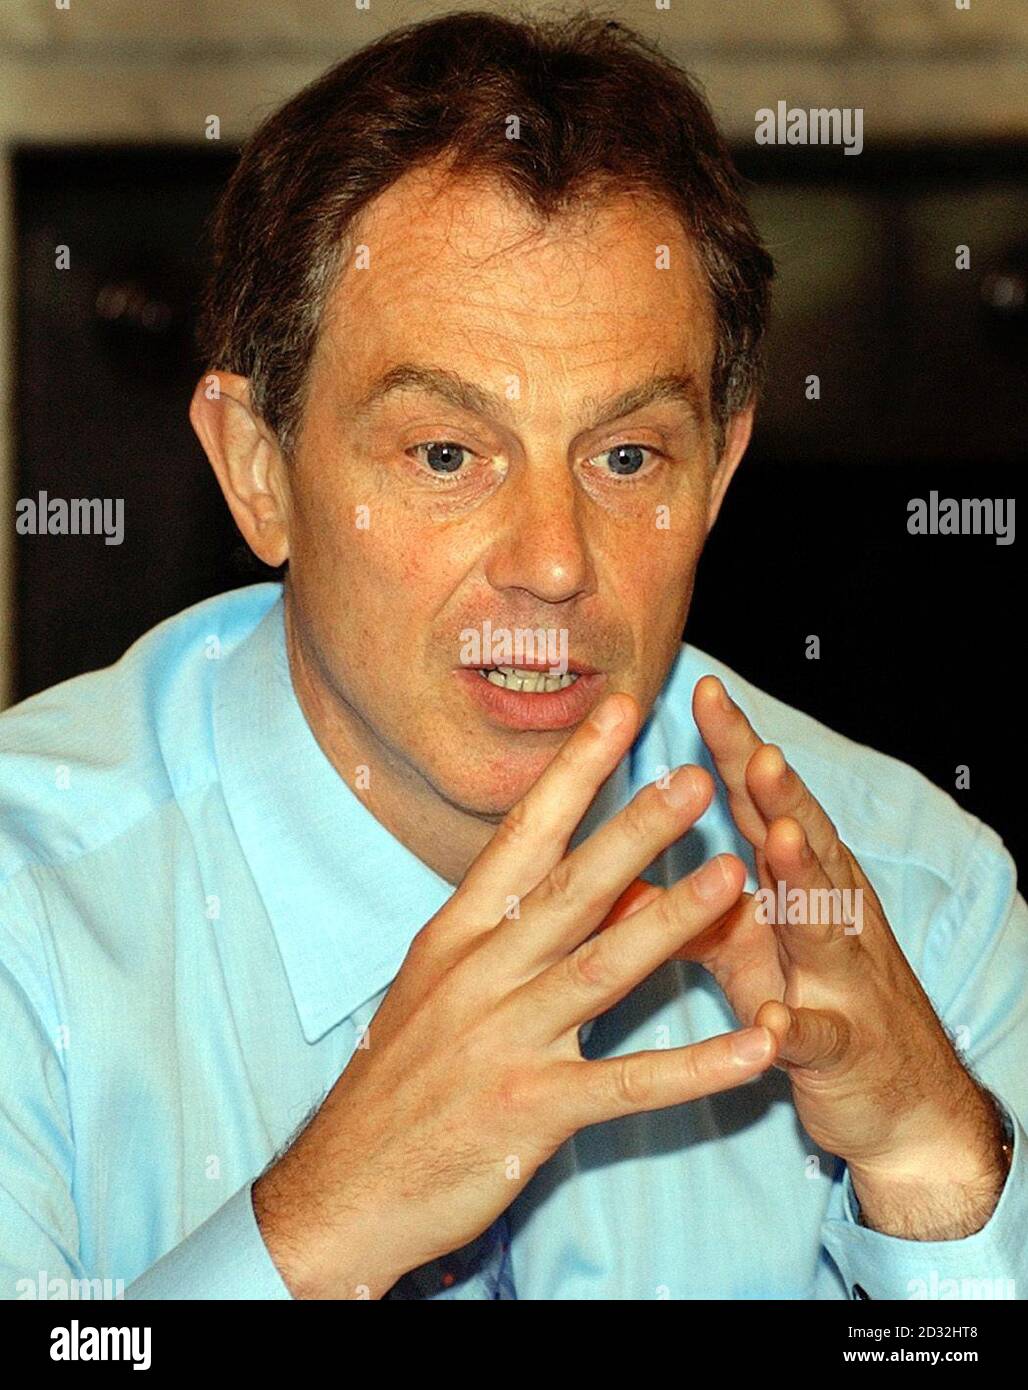 Prime Minister Tony Blair during a meeting with education heads, in the cabinet room at 10 Downing Street, London.    *The Prime Minister told the assembled heads and town hall education officials that there were some serious problems we have known about for a period of time concerning pupil behaviour and school discipline.   Stock Photo